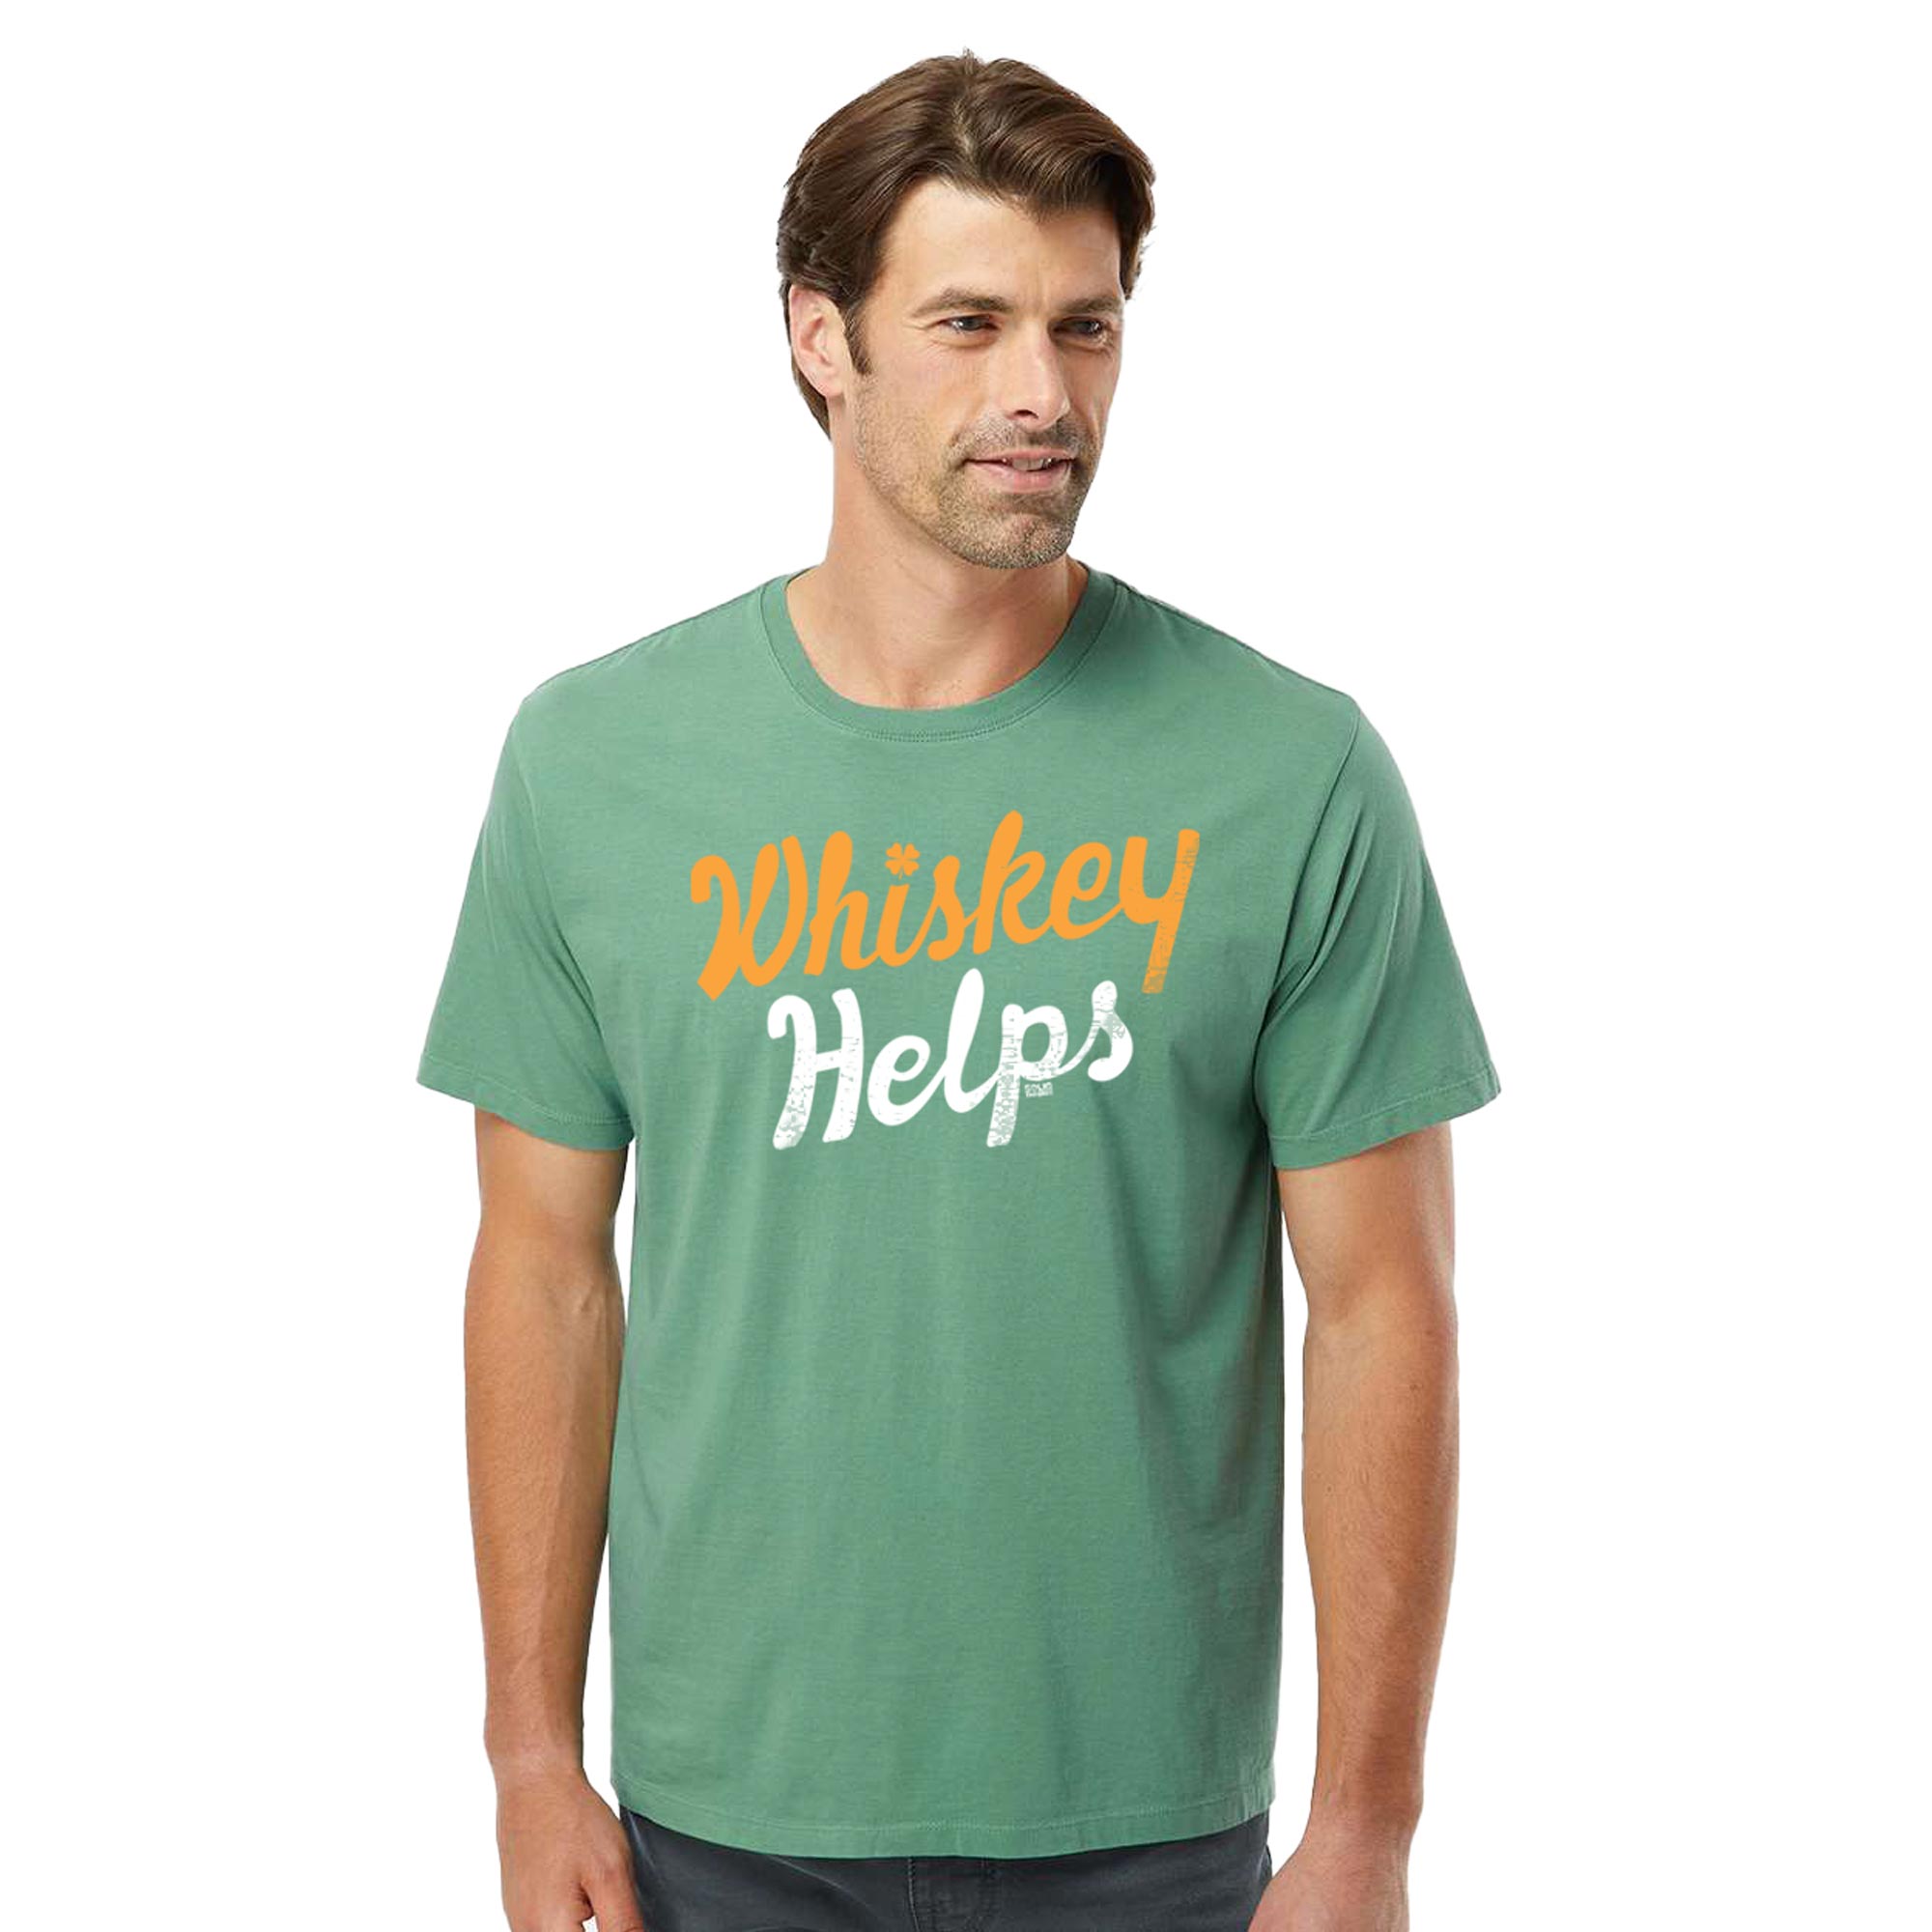 Irish Whiskey Helps Funny Organic Cotton T-shirt | Vintage St Paddy's  Tee | Solid Threads